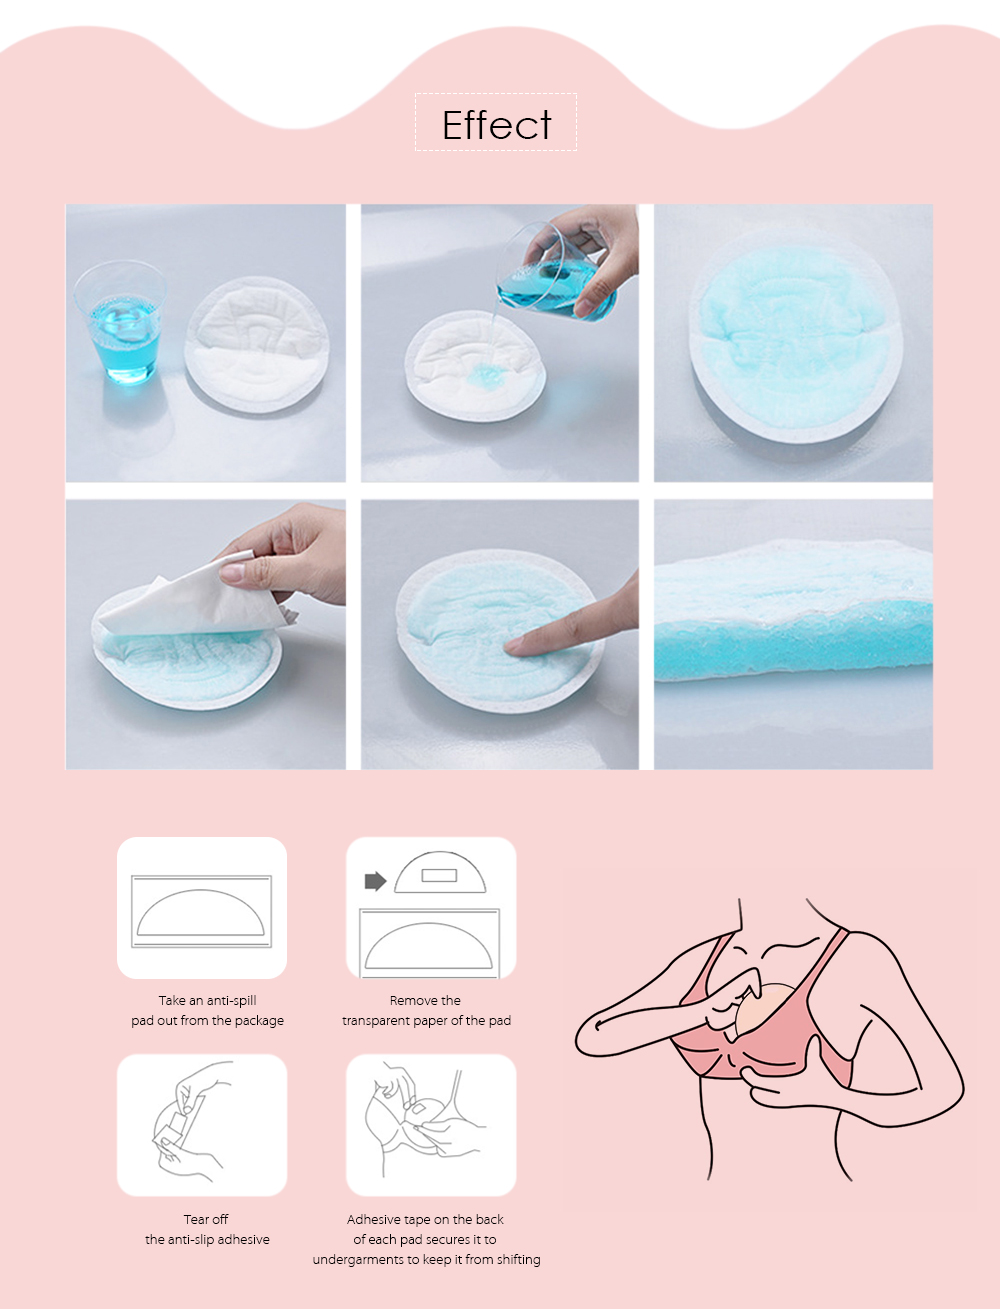 RealBubee 100pcs Disposable Breathable Anti-spill Leak-proof Breast Nursing Pads